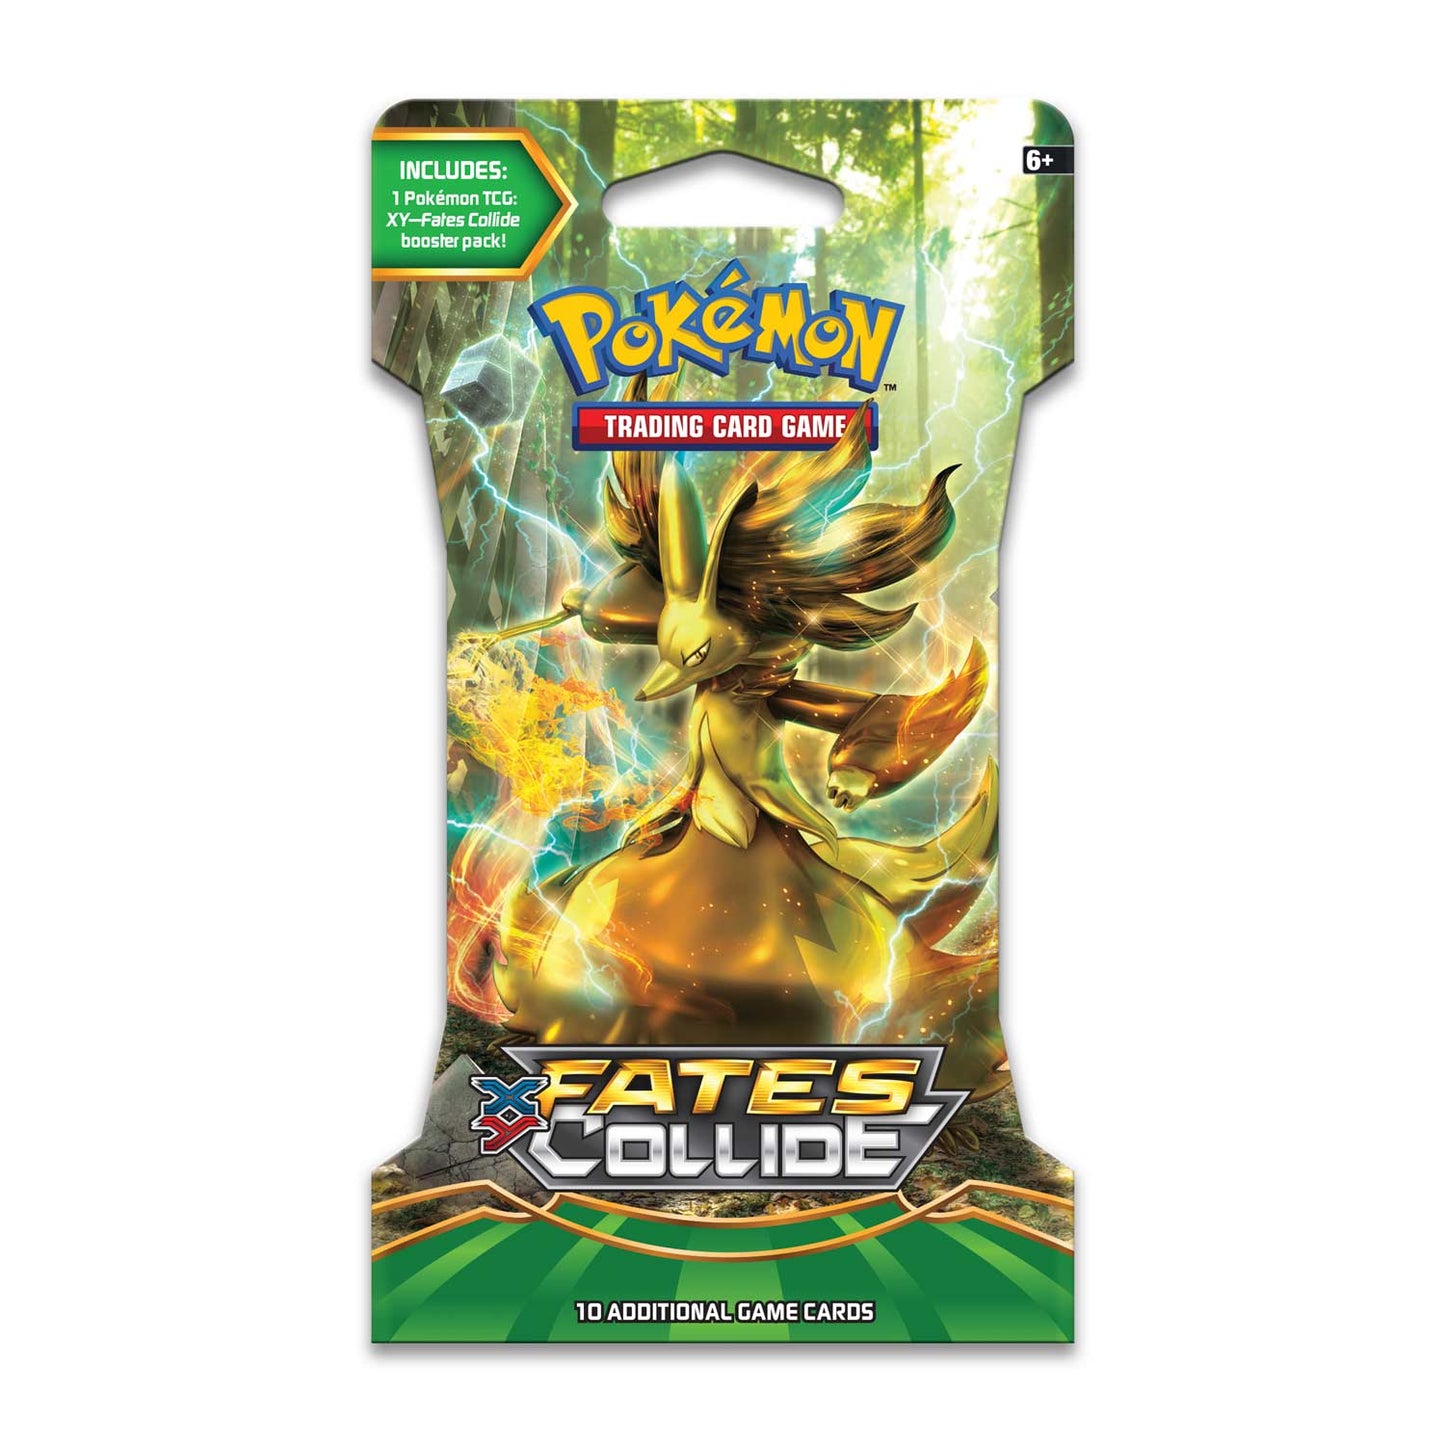 POKÉMON - FATES COLLIDE - BOOSTER PACK BLISTER / SLEEVED - XY